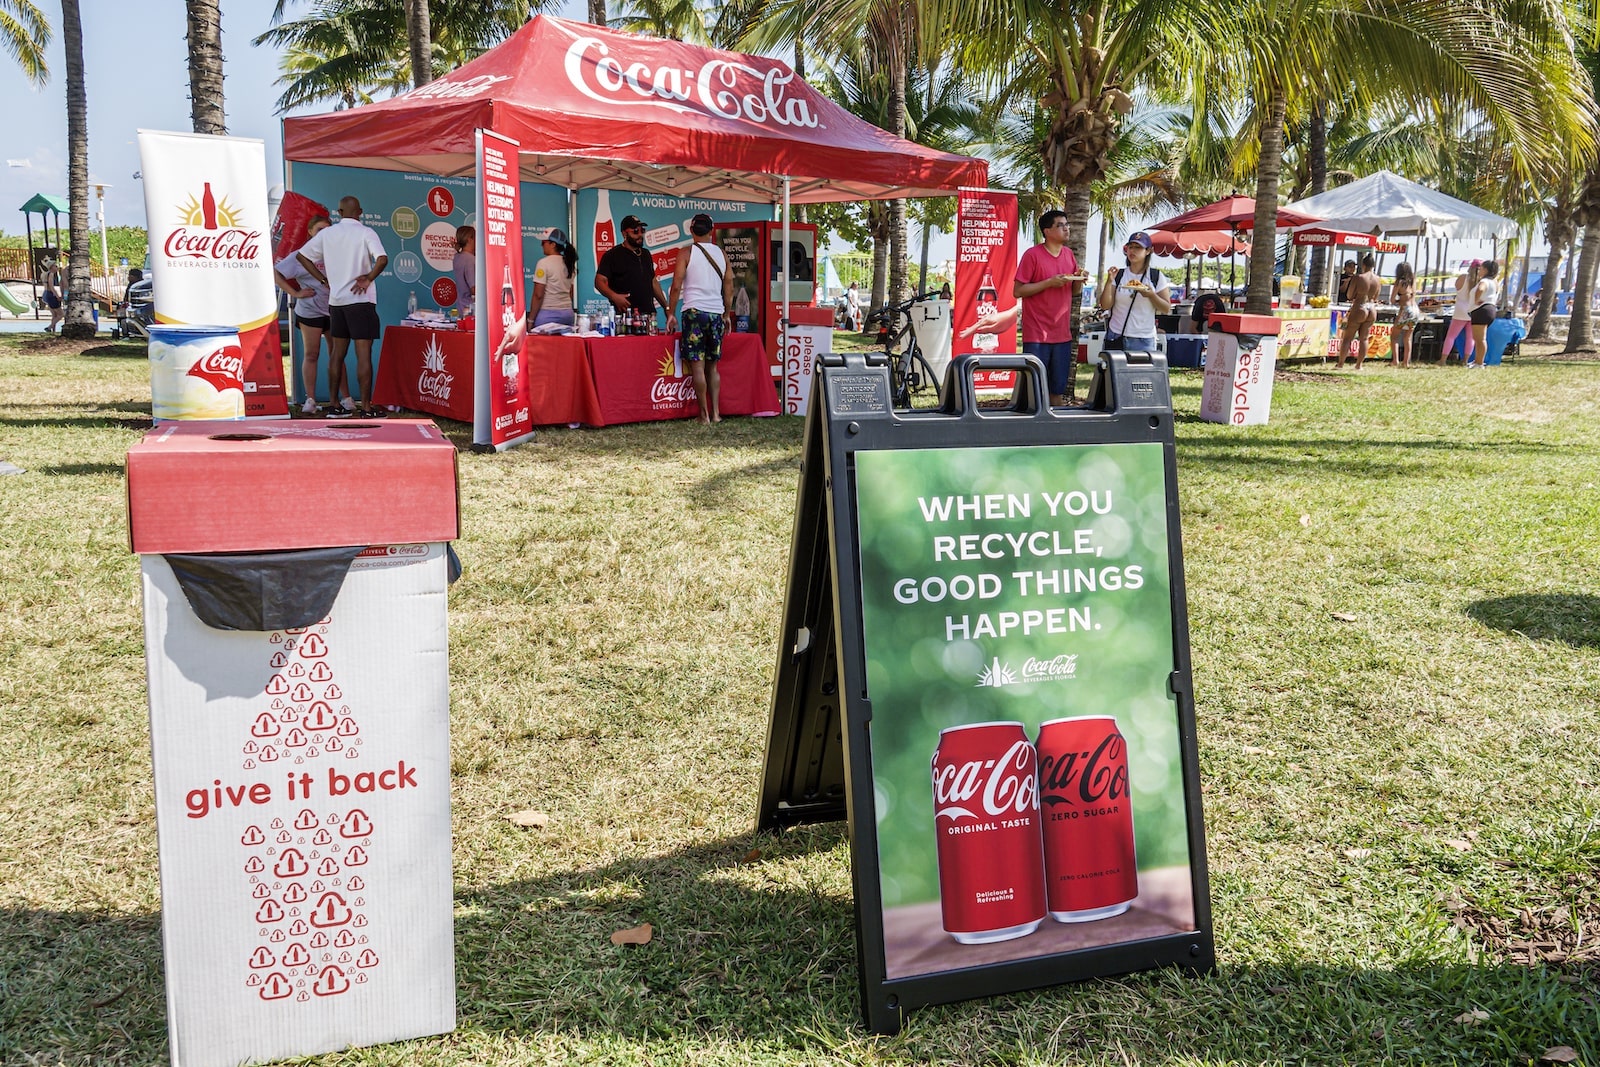 a coca cola kiosk on a green lawn next to a sign that says 'when you recycle, good things happen' with coca cola images